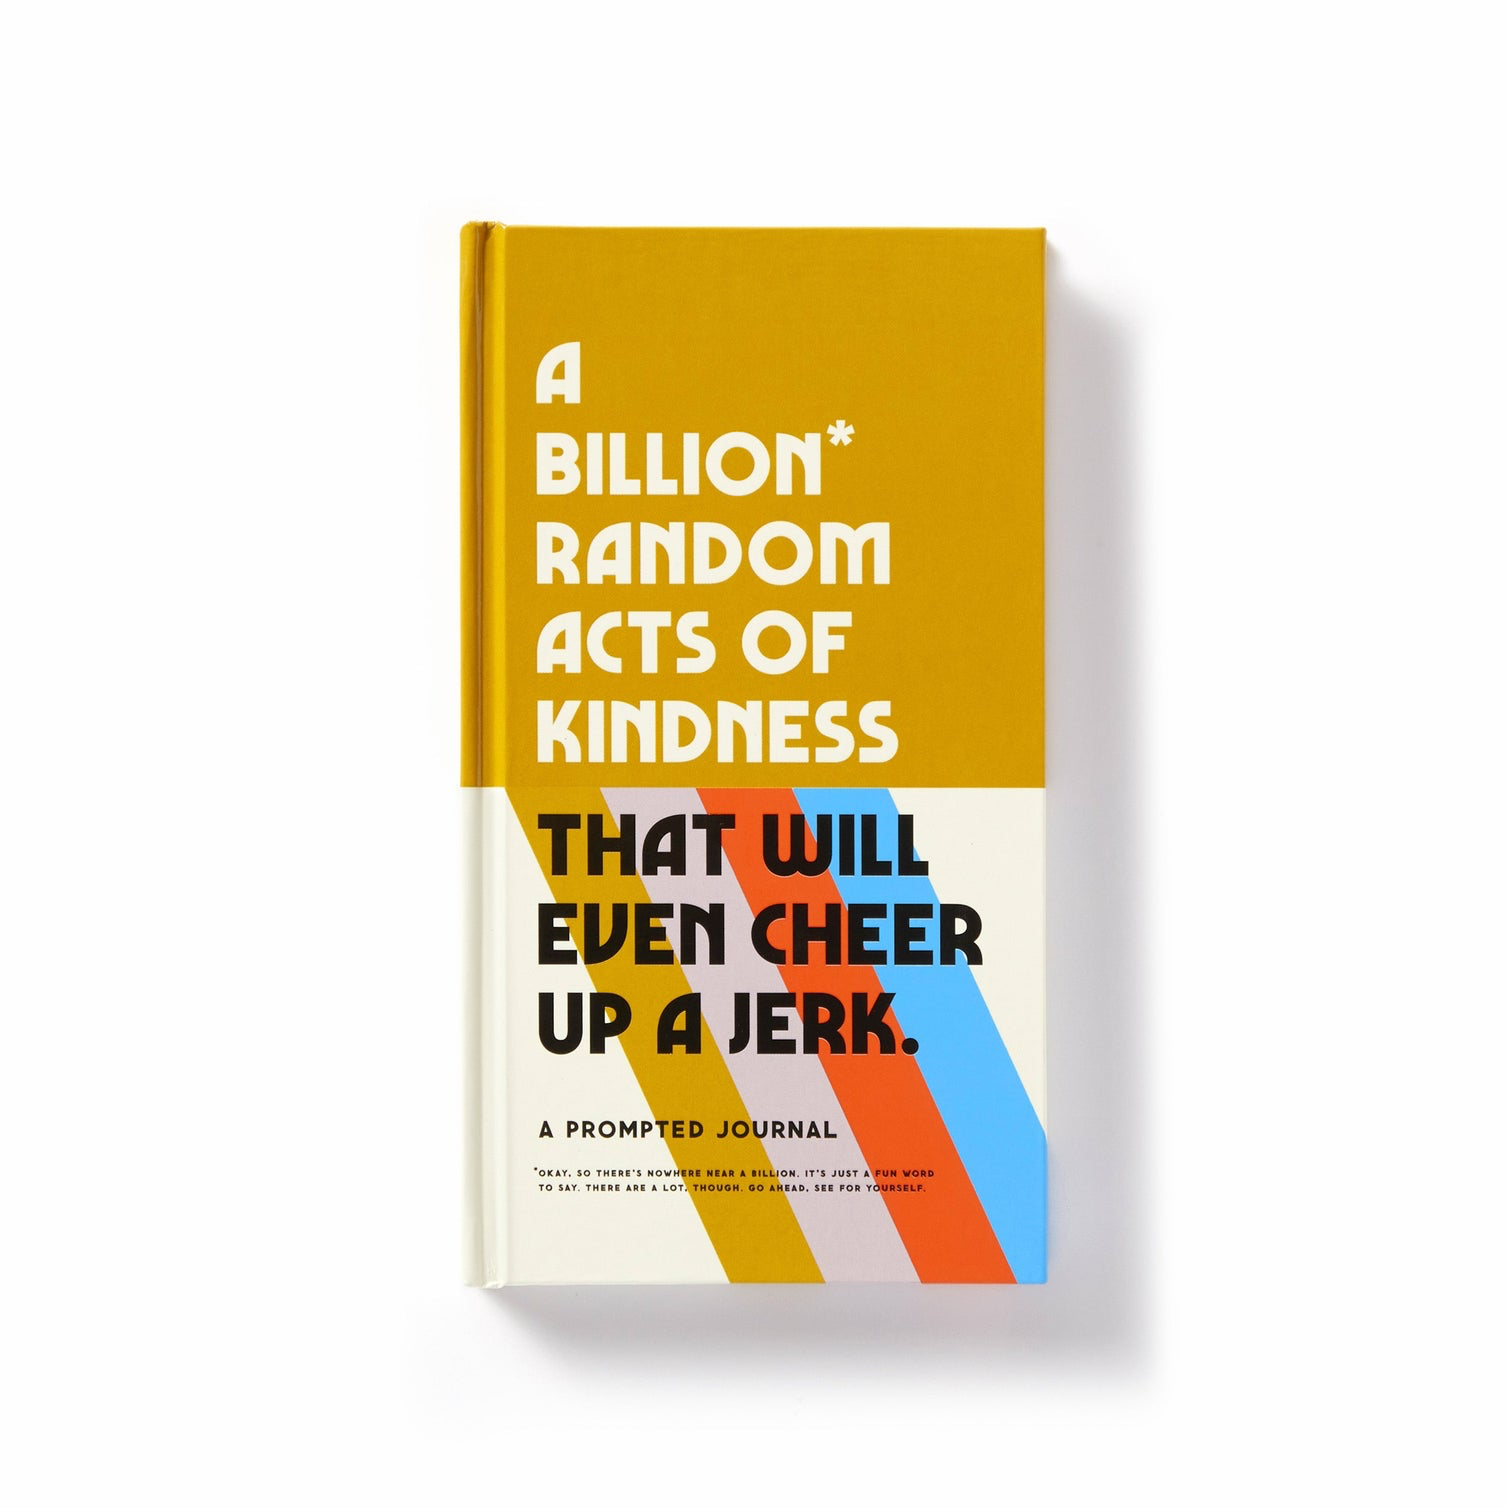 A Billion* Random Acts of Kindness Prompted Journal